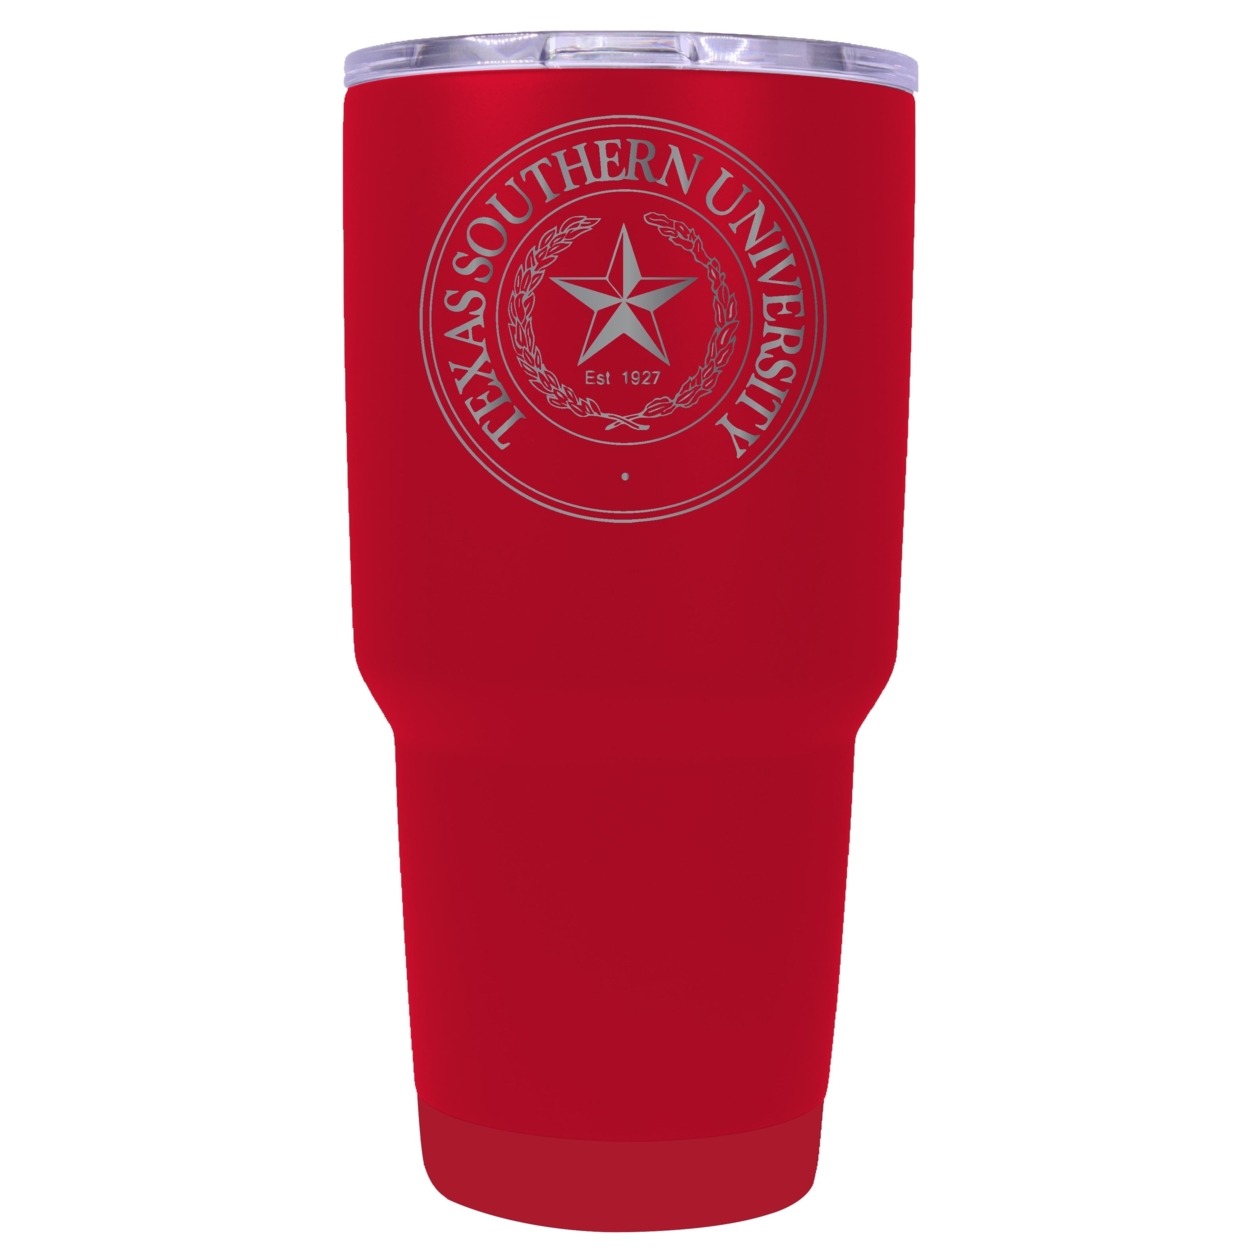 Texas Southern University 24 Oz Laser Engraved Stainless Steel Insulated Tumbler - Choose Your Color. - Navy